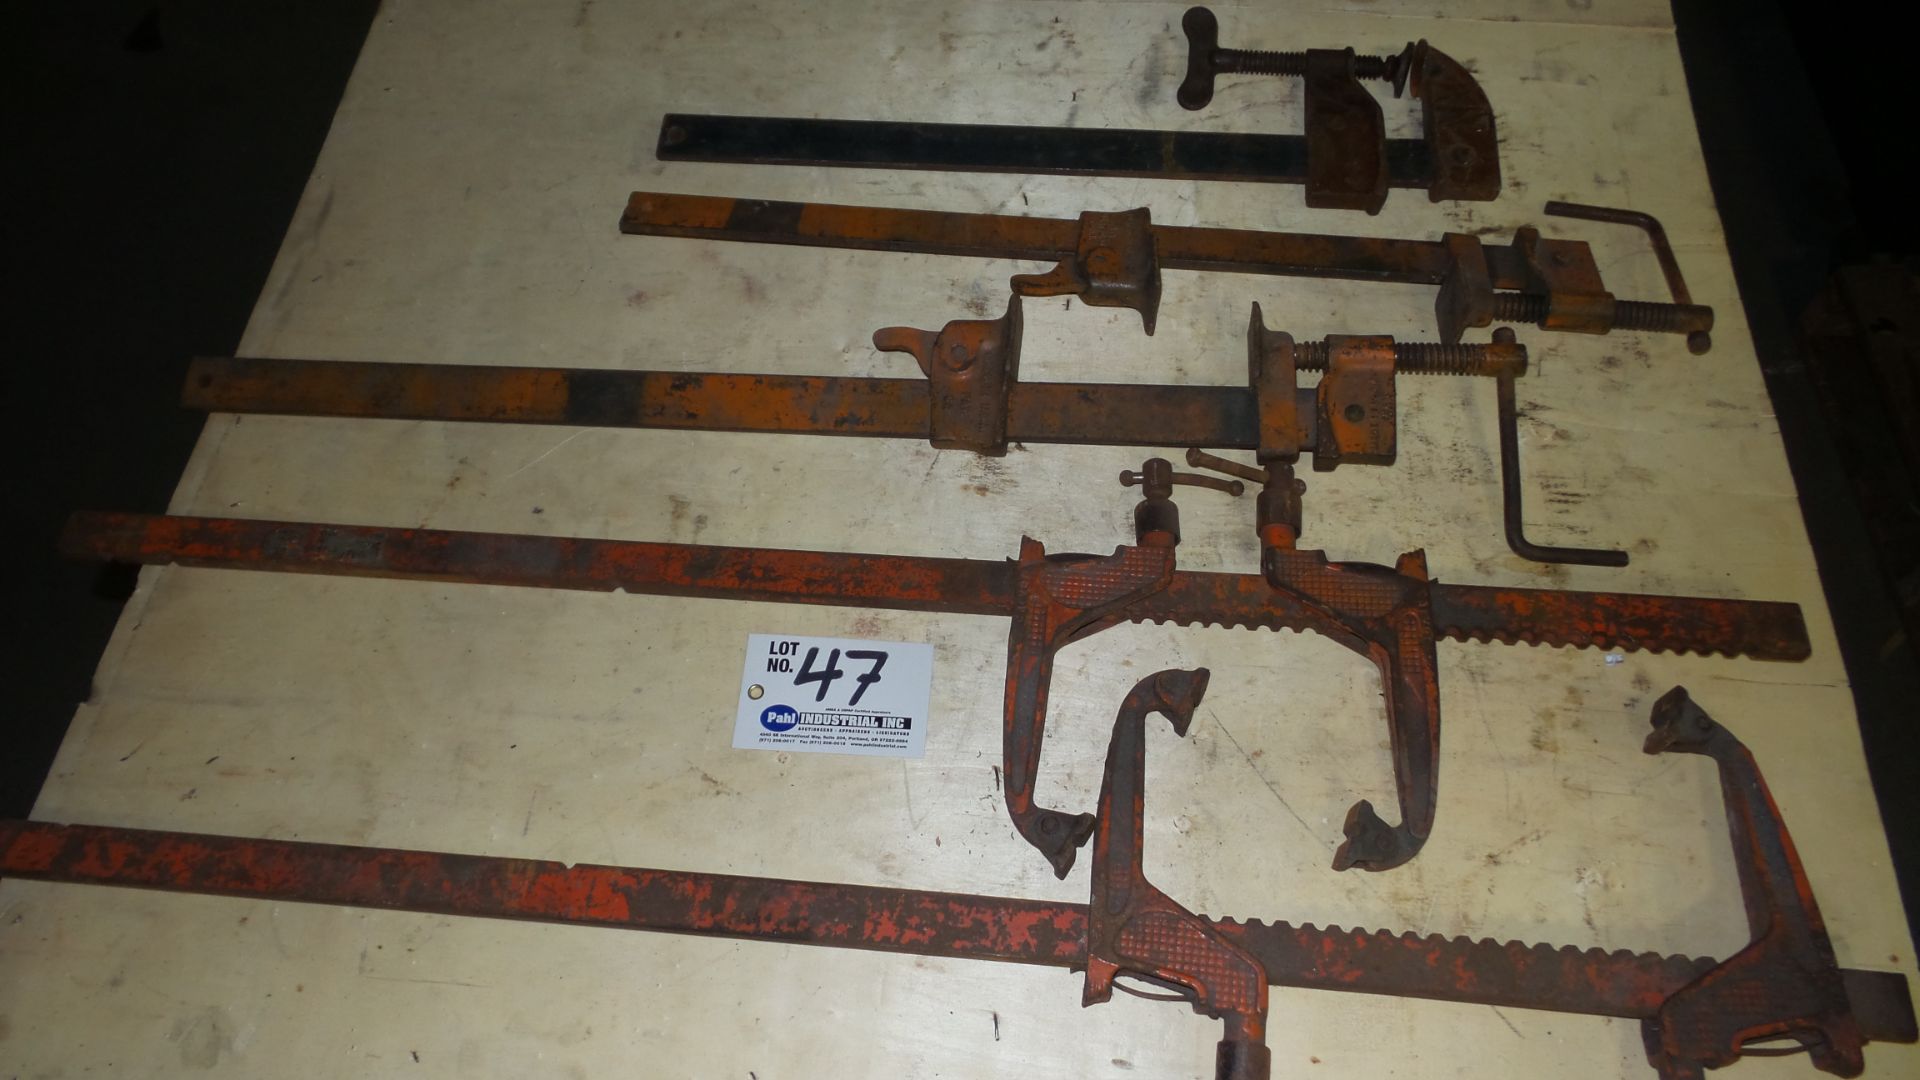 2 Carver 12" bar clamps, 3 assorted size steel bar clamps